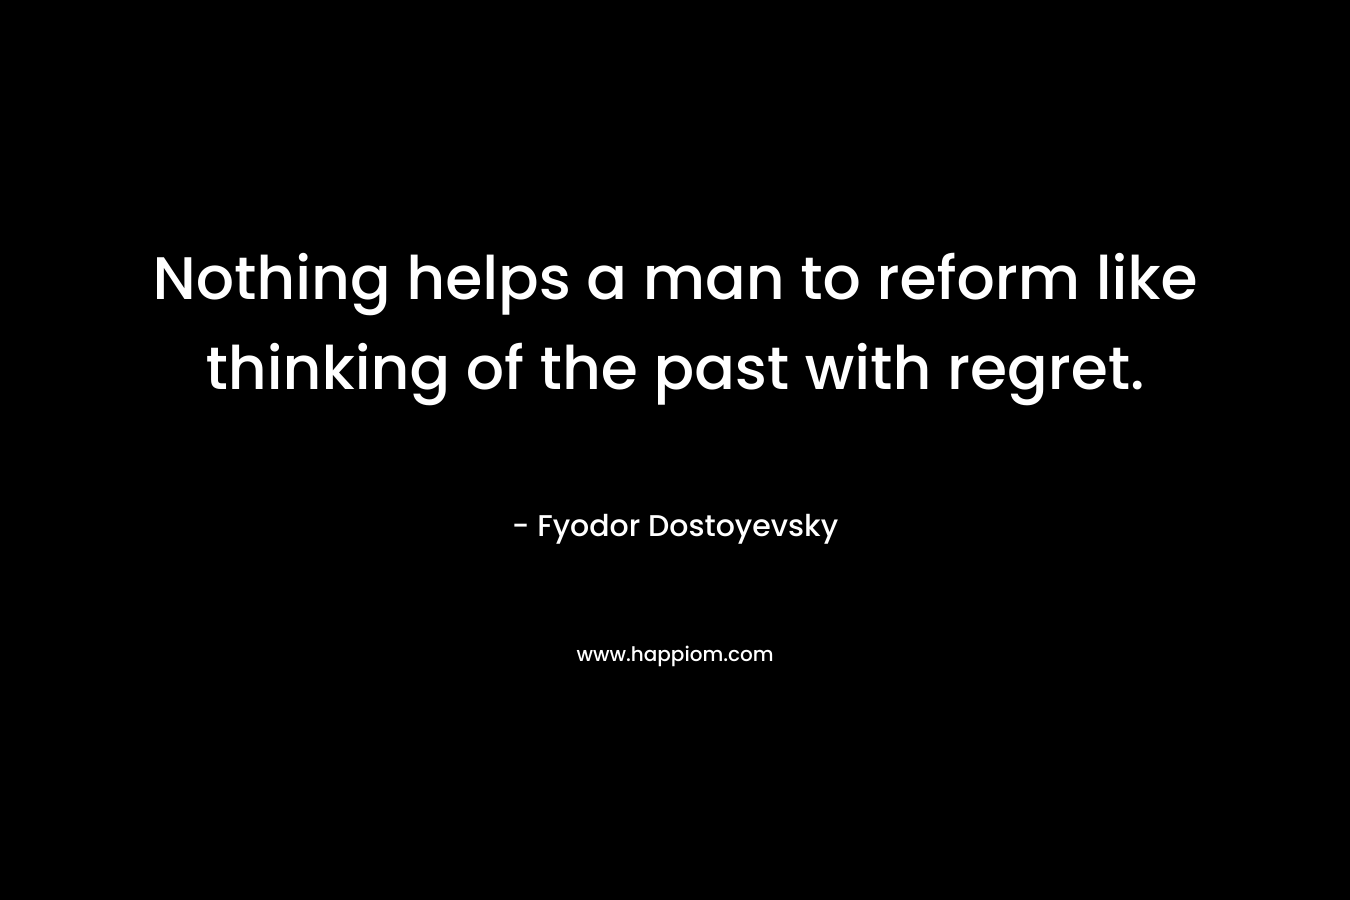 Nothing helps a man to reform like thinking of the past with regret. – Fyodor Dostoyevsky